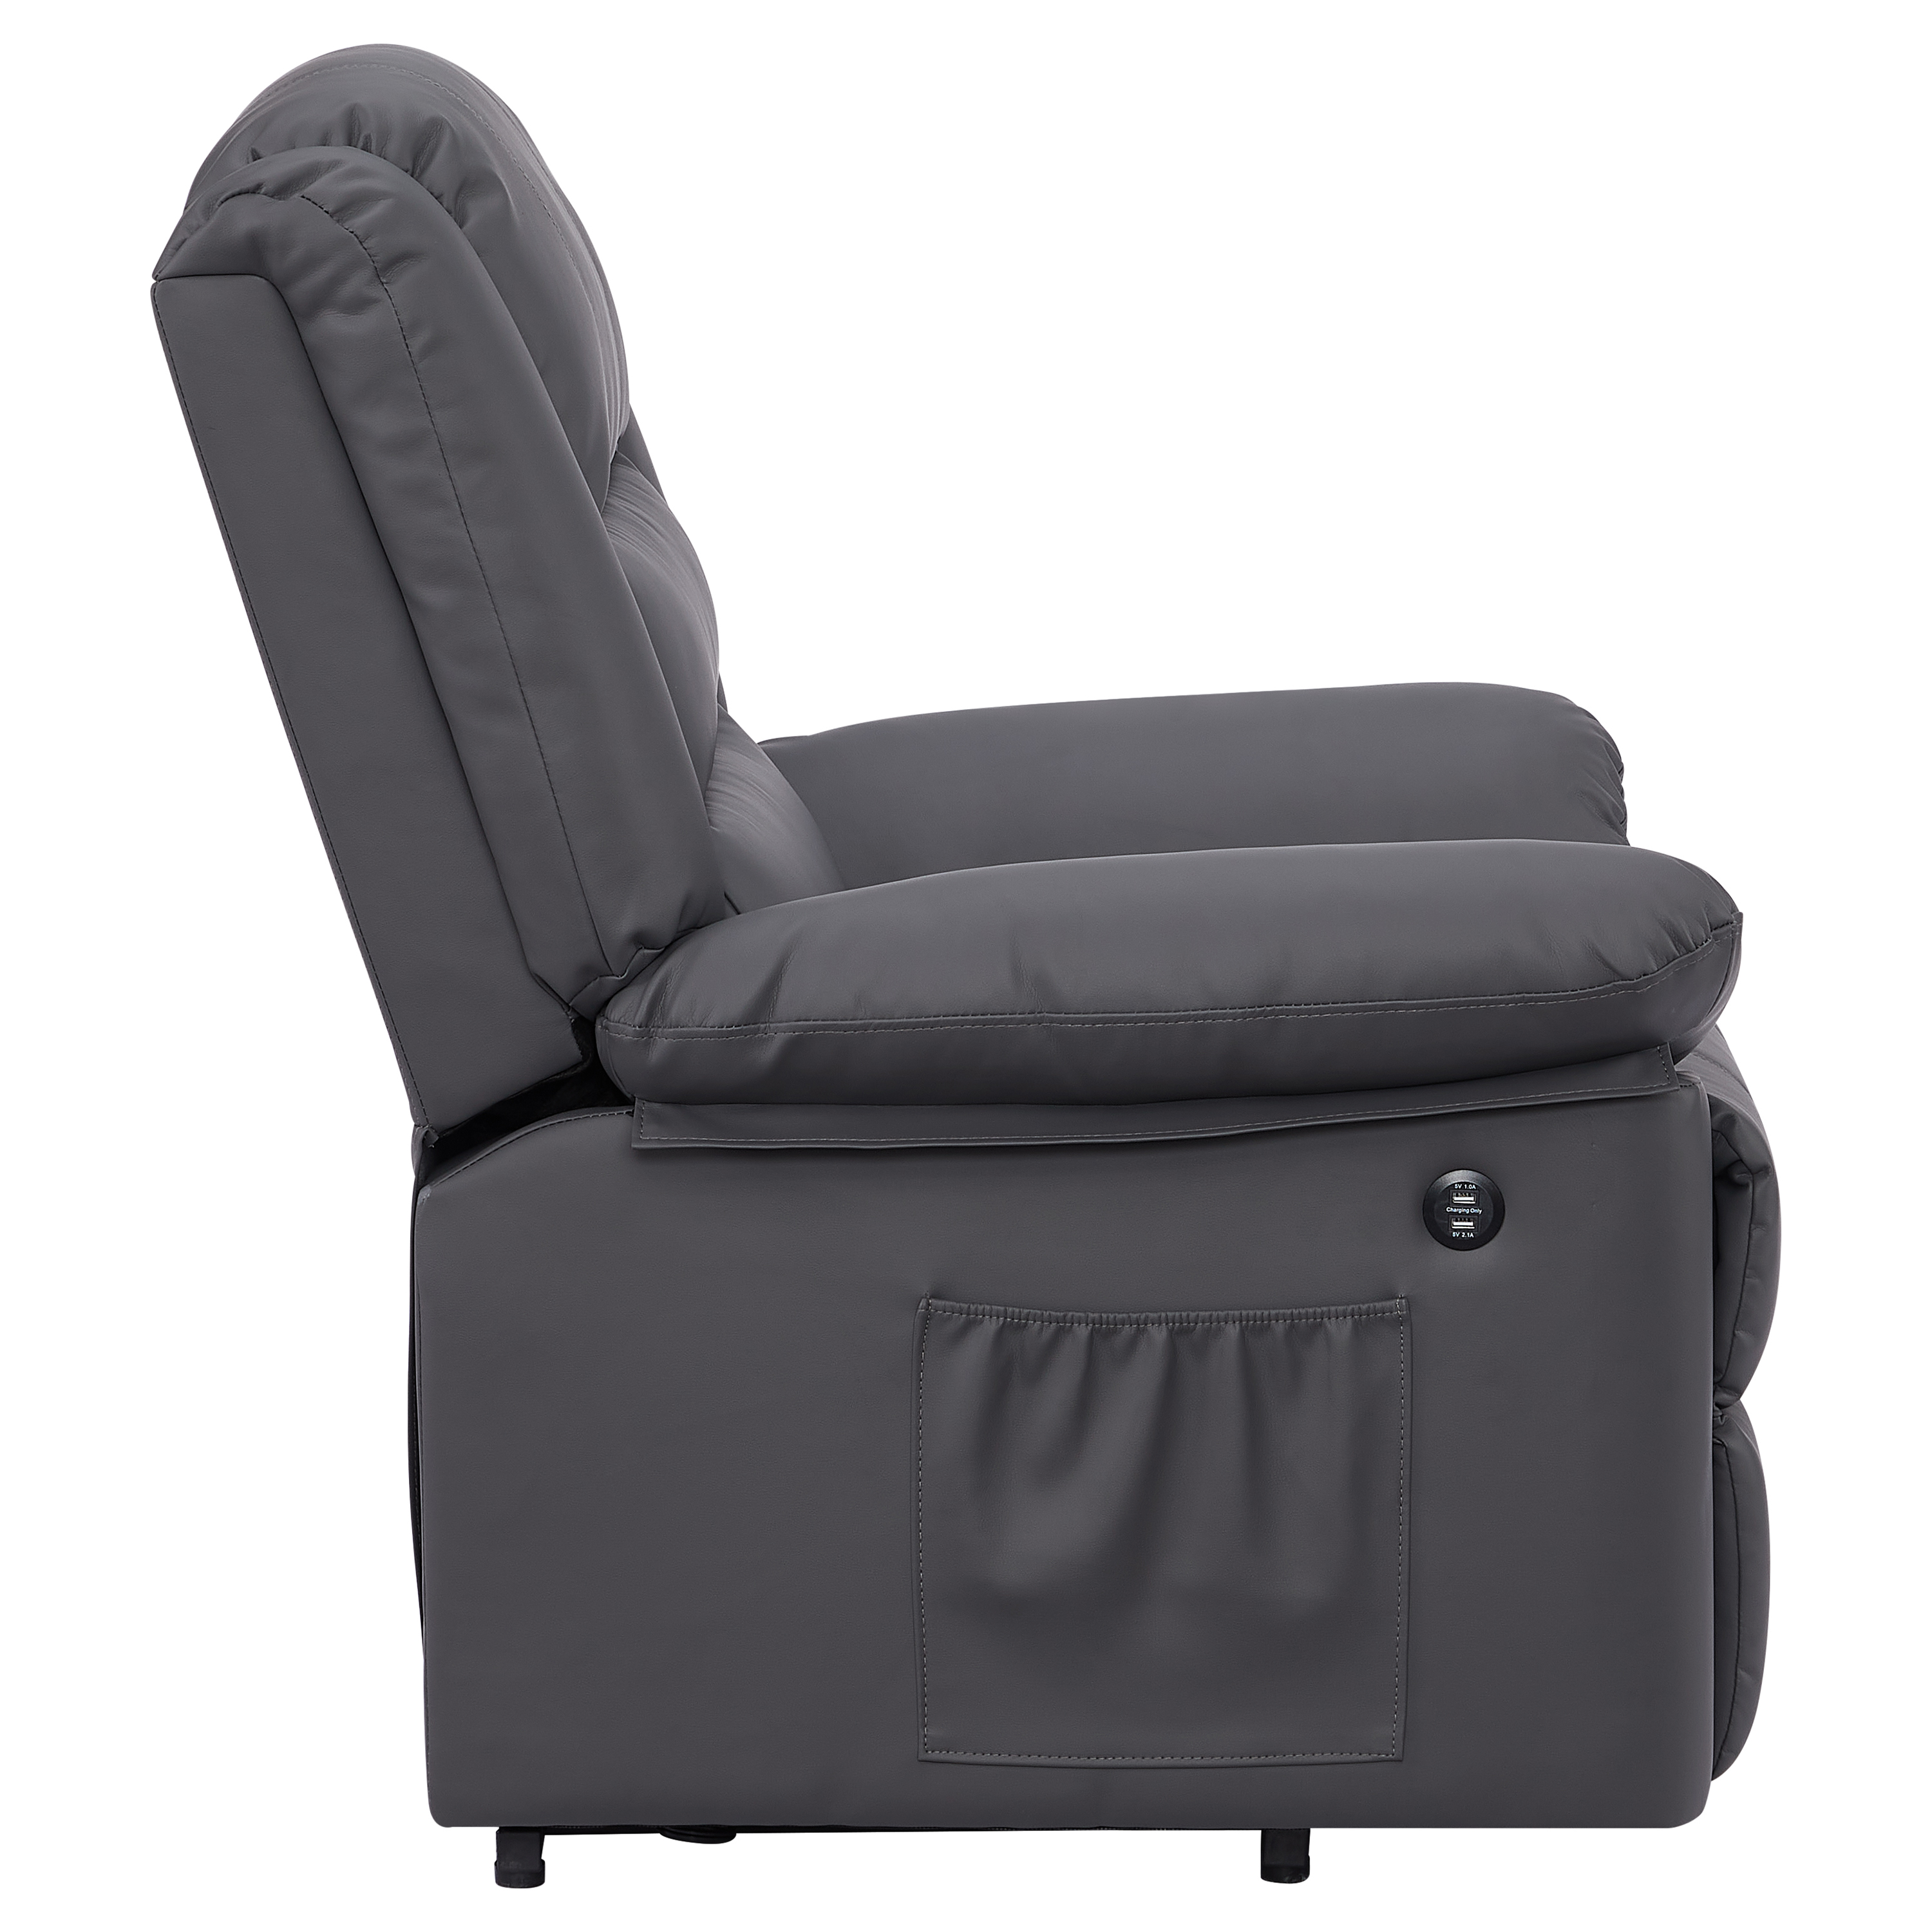 Hillsdale Cedar City Power Lift Faux Leather Recliner with USB, Dusk Gray - image 3 of 23